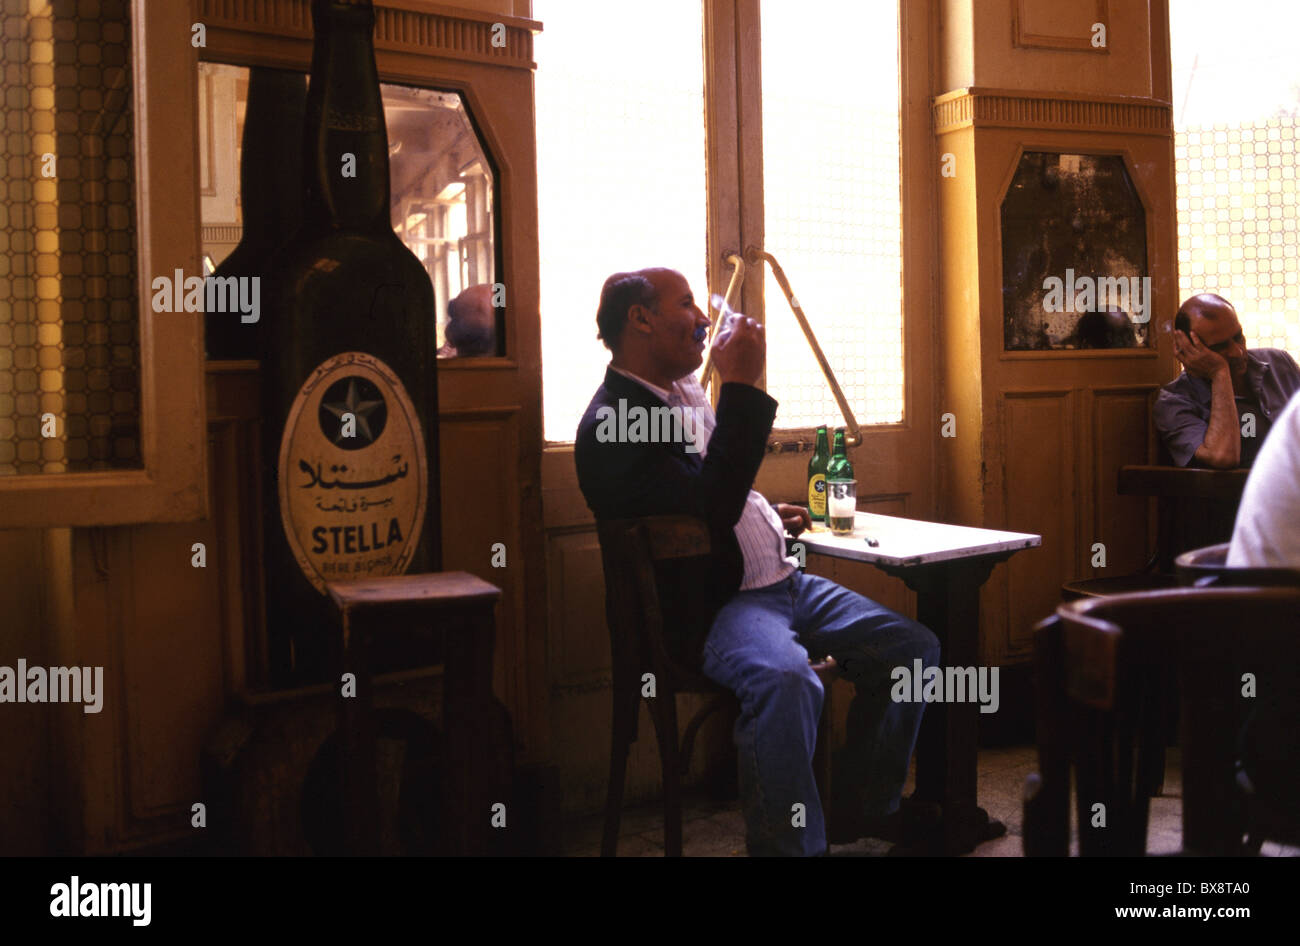 Egyptian men smoke and drink local Stella Beer inside Cafe Riche in downtown Cairo Egypt Stock Photo